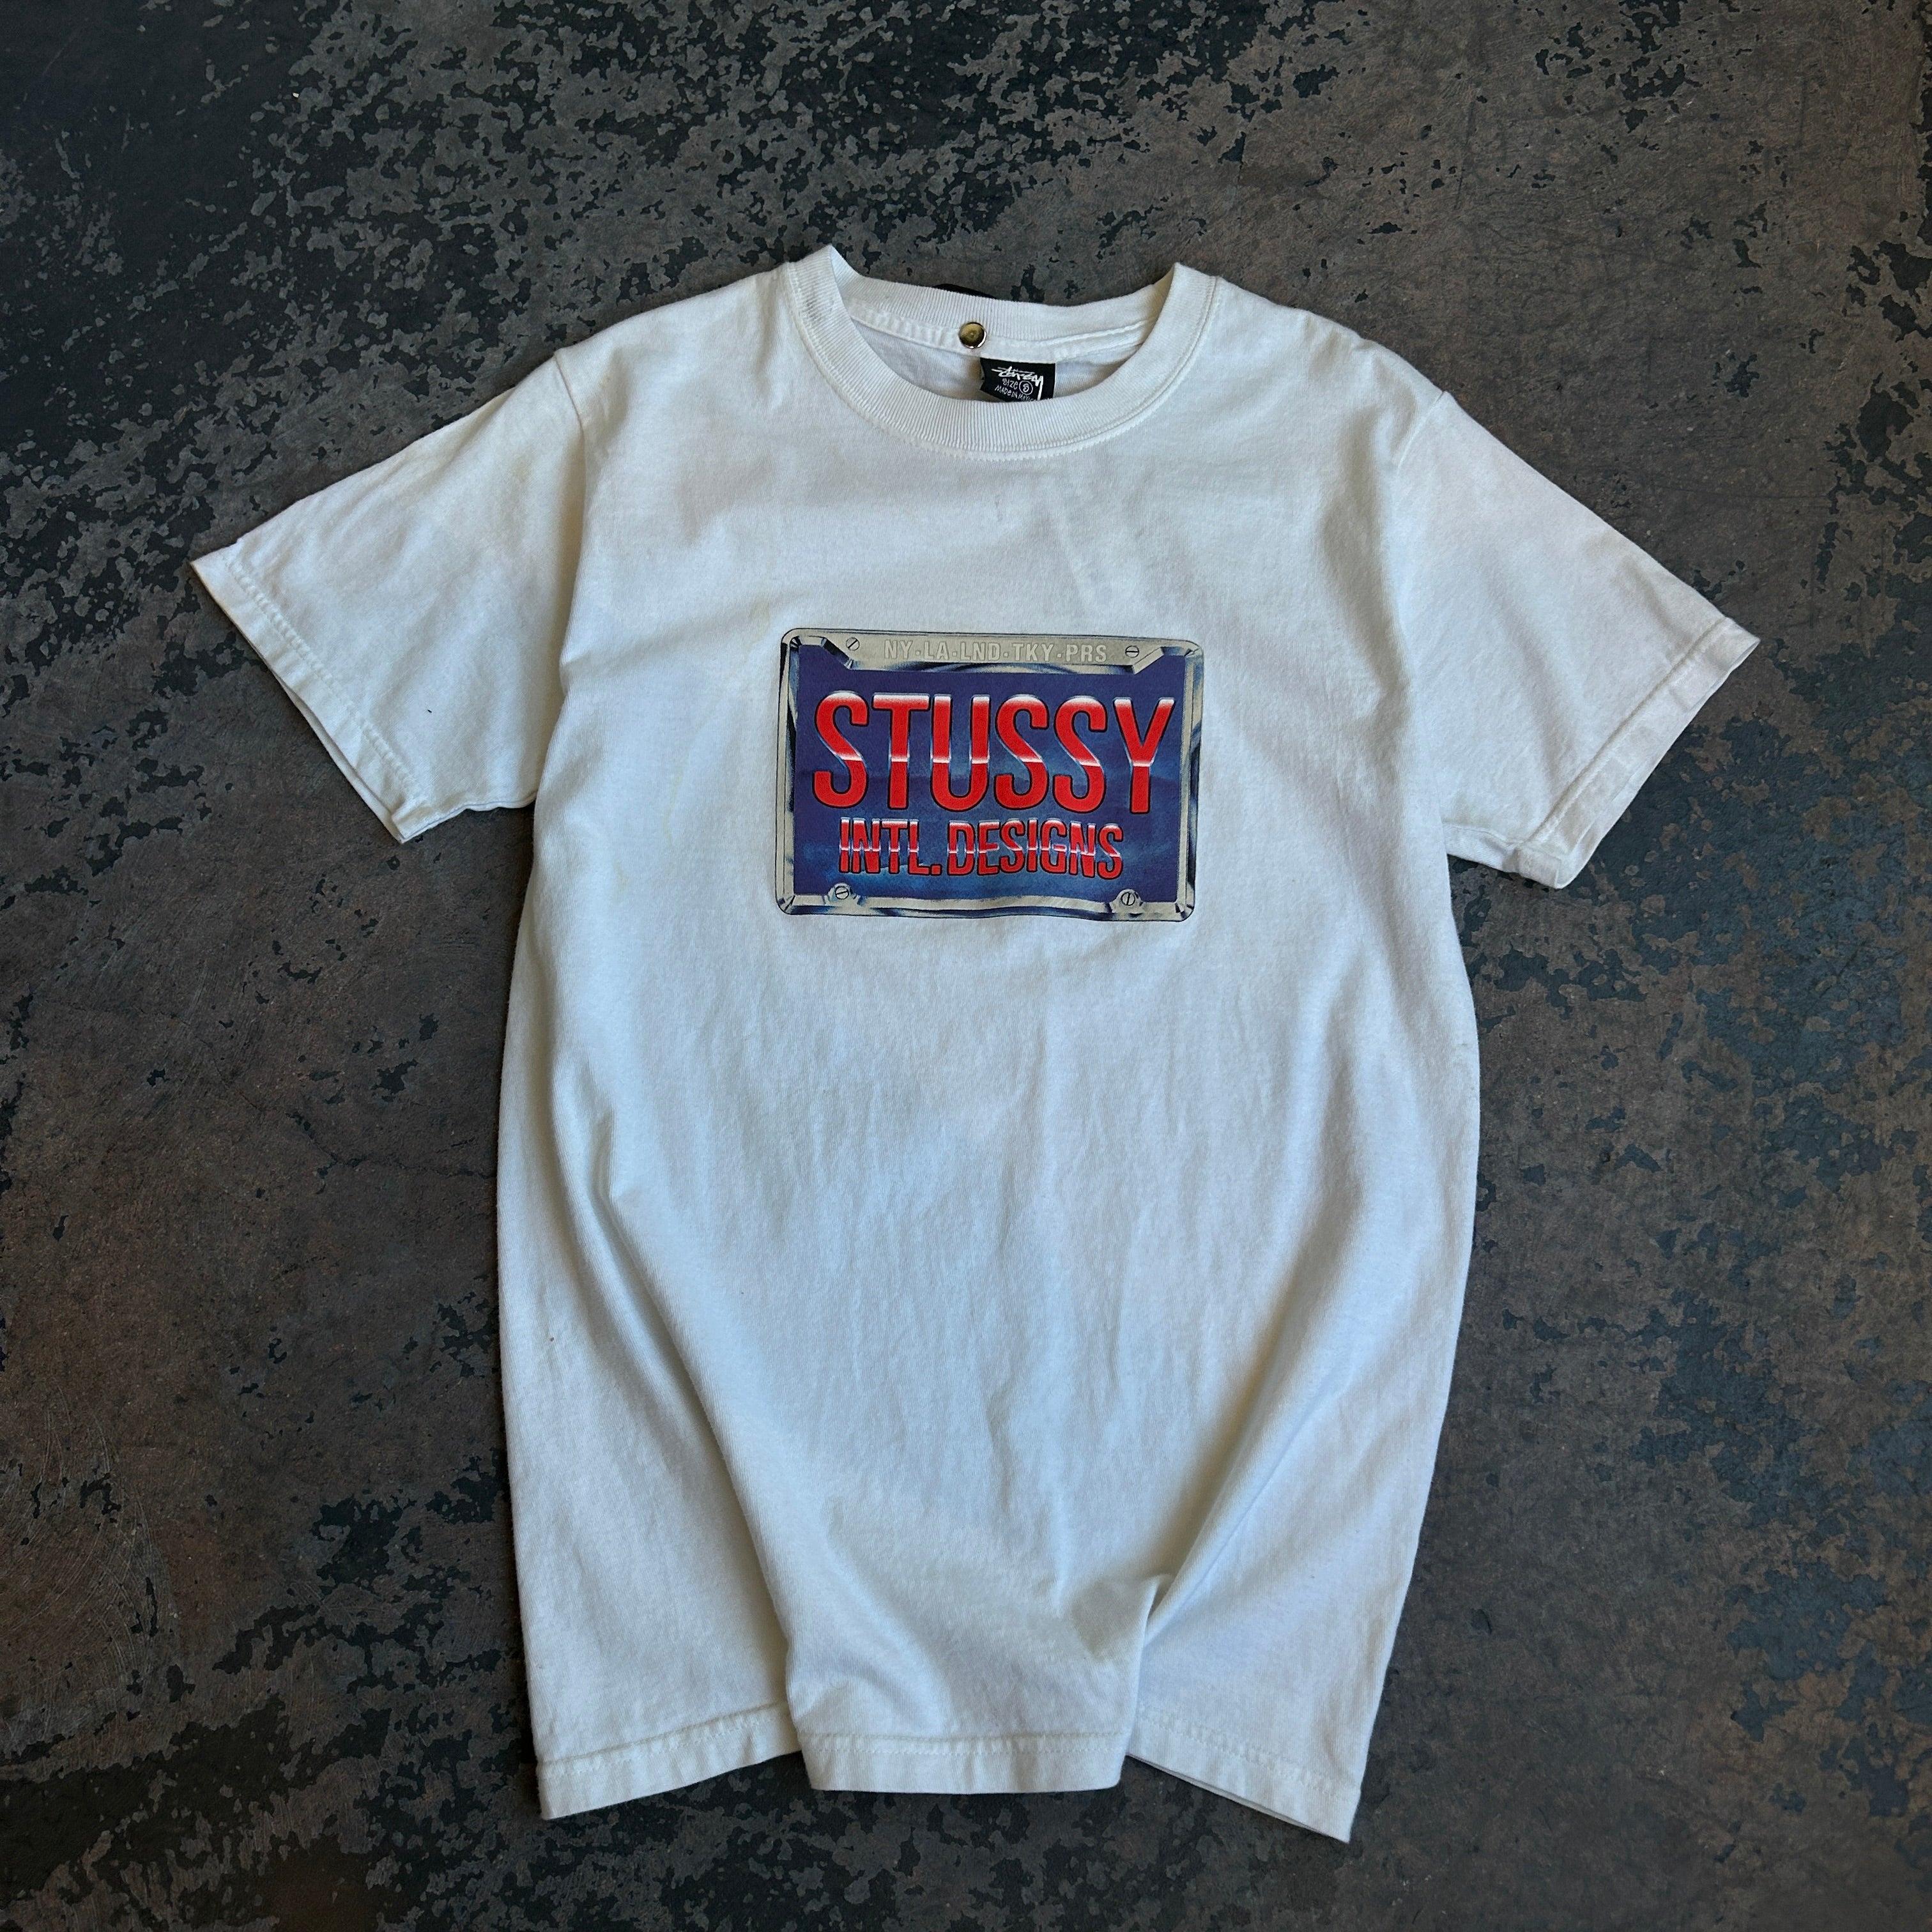 Stussy Licence Plate T-Shirt